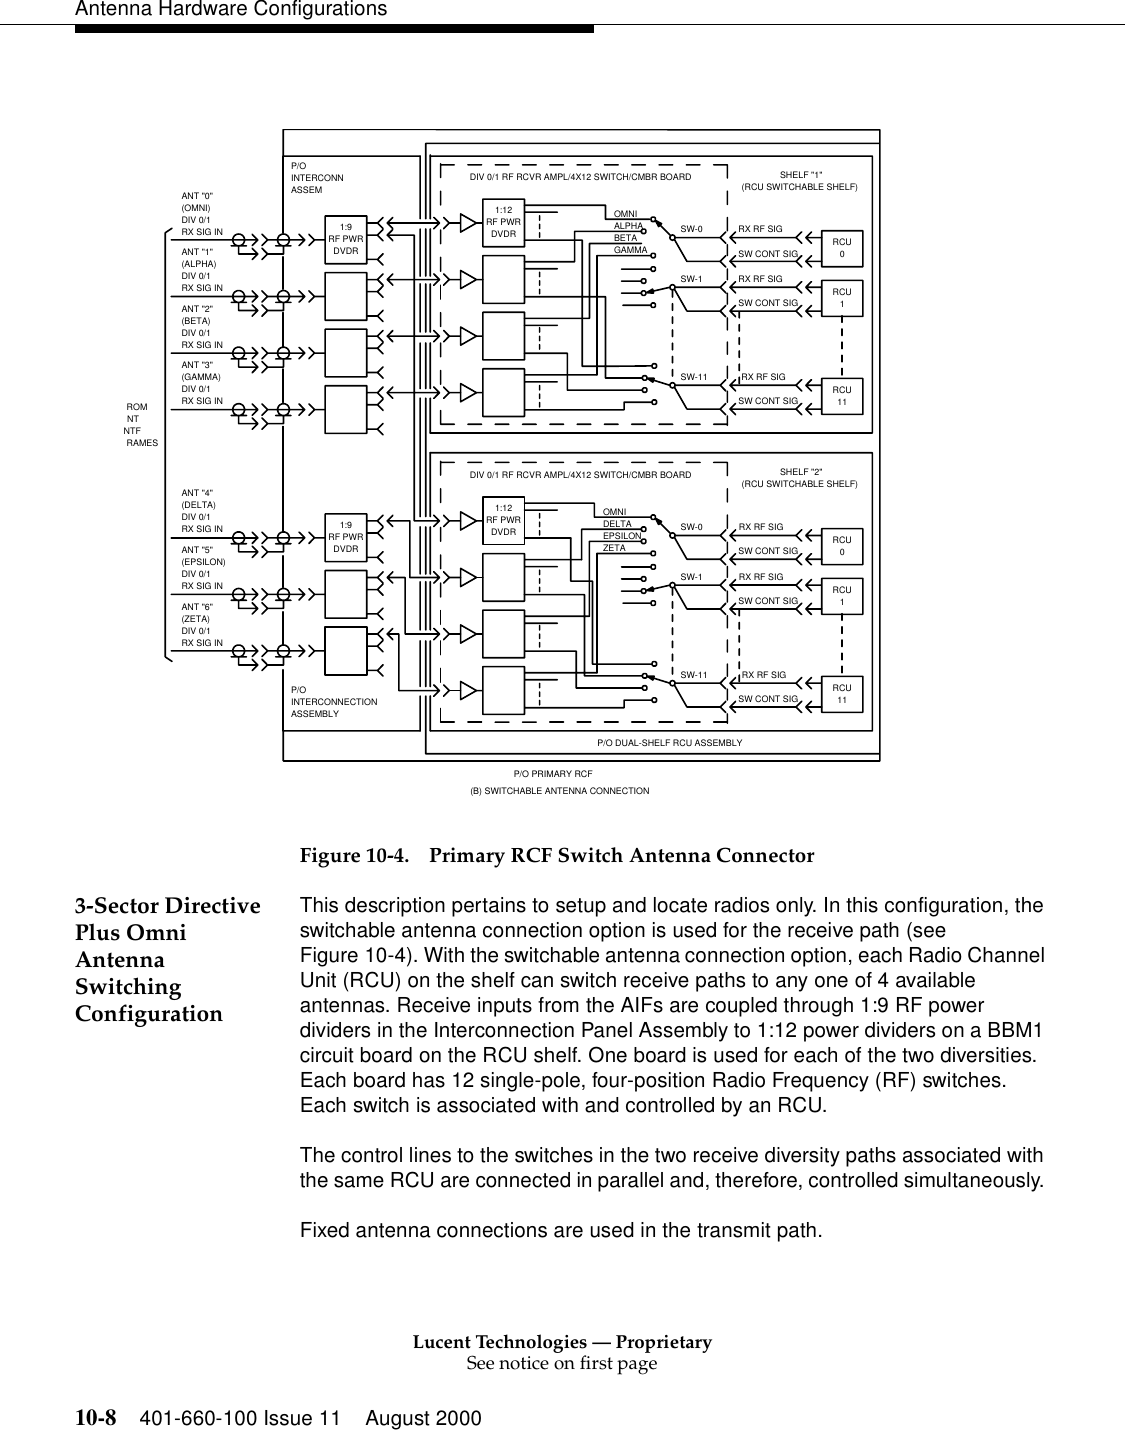 Lucent Technologies — ProprietarySee notice on first page10-8 401-660-100 Issue 11 August 2000Antenna Hardware ConfigurationsFigure 10-4. Primary RCF Switch Antenna Connector3-Sector Directive Plus Omni Antenna Switching Configuration This description pertains to setup and locate radios only. In this configuration, the switchable antenna connection option is used for the receive path (see Figure 10-4). With the switchable antenna connection option, each Radio Channel Unit (RCU) on the shelf can switch receive paths to any one of 4 available antennas. Receive inputs from the AIFs are coupled through 1:9 RF power dividers in the Interconnection Panel Assembly to 1:12 power dividers on a BBM1 circuit board on the RCU shelf. One board is used for each of the two diversities. Each board has 12 single-pole, four-position Radio Frequency (RF) switches. Each switch is associated with and controlled by an RCU.The control lines to the switches in the two receive diversity paths associated with the same RCU are connected in parallel and, therefore, controlled simultaneously. Fixed antenna connections are used in the transmit path. RAMES(B) SWITCHABLE ANTENNA CONNECTIONP/O PRIMARY RCFASSEMBLYINTERCONNECTIONNTFNTROMP/OANT &quot;3&quot;(BETA)ANT &quot;2&quot;(ALPHA)ANT &quot;1&quot;DIV 0/1DIV 0/1DIV 0/1(OMNI)ANT &quot;0&quot;INTERCONNRX SIG INRX SIG INRX SIG INASSEMDIV 0/1RX SIG IN(ZETA)ANT &quot;6&quot;ANT &quot;4&quot;ANT &quot;5&quot;(DELTA)DIV 0/1DIV 0/1(GAMMA)DIV 0/1(EPSILON)RX SIG INRX SIG INP/ORX SIG INDVDRRF PWR1:9DVDRRF PWR1:9SW CONT SIGGAMMA 0RCUSHELF &quot;1&quot;(RCU SWITCHABLE SHELF)RX RF SIGSW-0DIV 0/1 RF RCVR AMPL/4X12 SWITCH/CMBR BOARDBETAALPHAOMNIDVDRRF PWR1:12P/O DUAL-SHELF RCU ASSEMBLY1:12SW CONT SIG 1RCUSW-1 RX RF SIGSW CONT SIGSW CONT SIGSW CONT SIG111SW-11RCURX RF SIGRCURX RF SIGSW-1SW CONT SIGZETA 011RCURCUSHELF &quot;2&quot;(RCU SWITCHABLE SHELF)RX RF SIGSW-11 RX RF SIGEPSILONDELTA SW-0OMNIDIV 0/1 RF RCVR AMPL/4X12 SWITCH/CMBR BOARDDVDRRF PWR